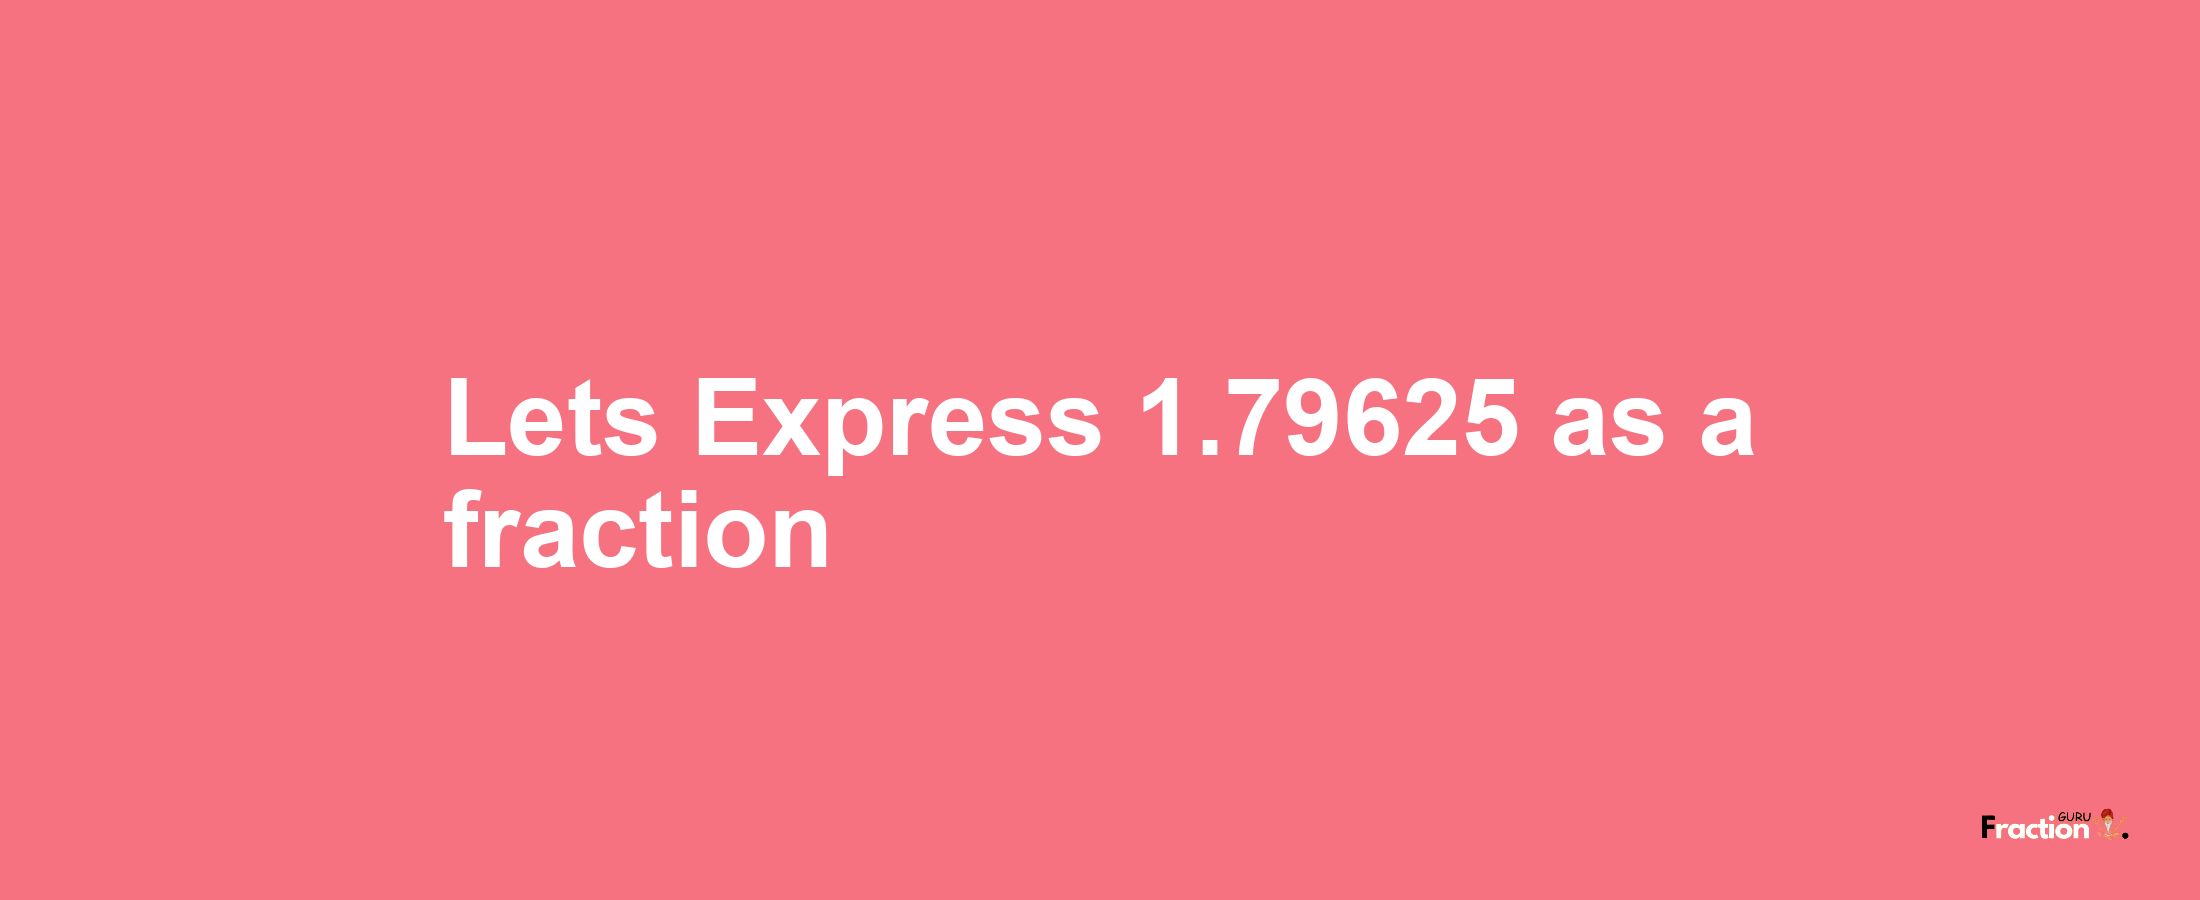 Lets Express 1.79625 as afraction